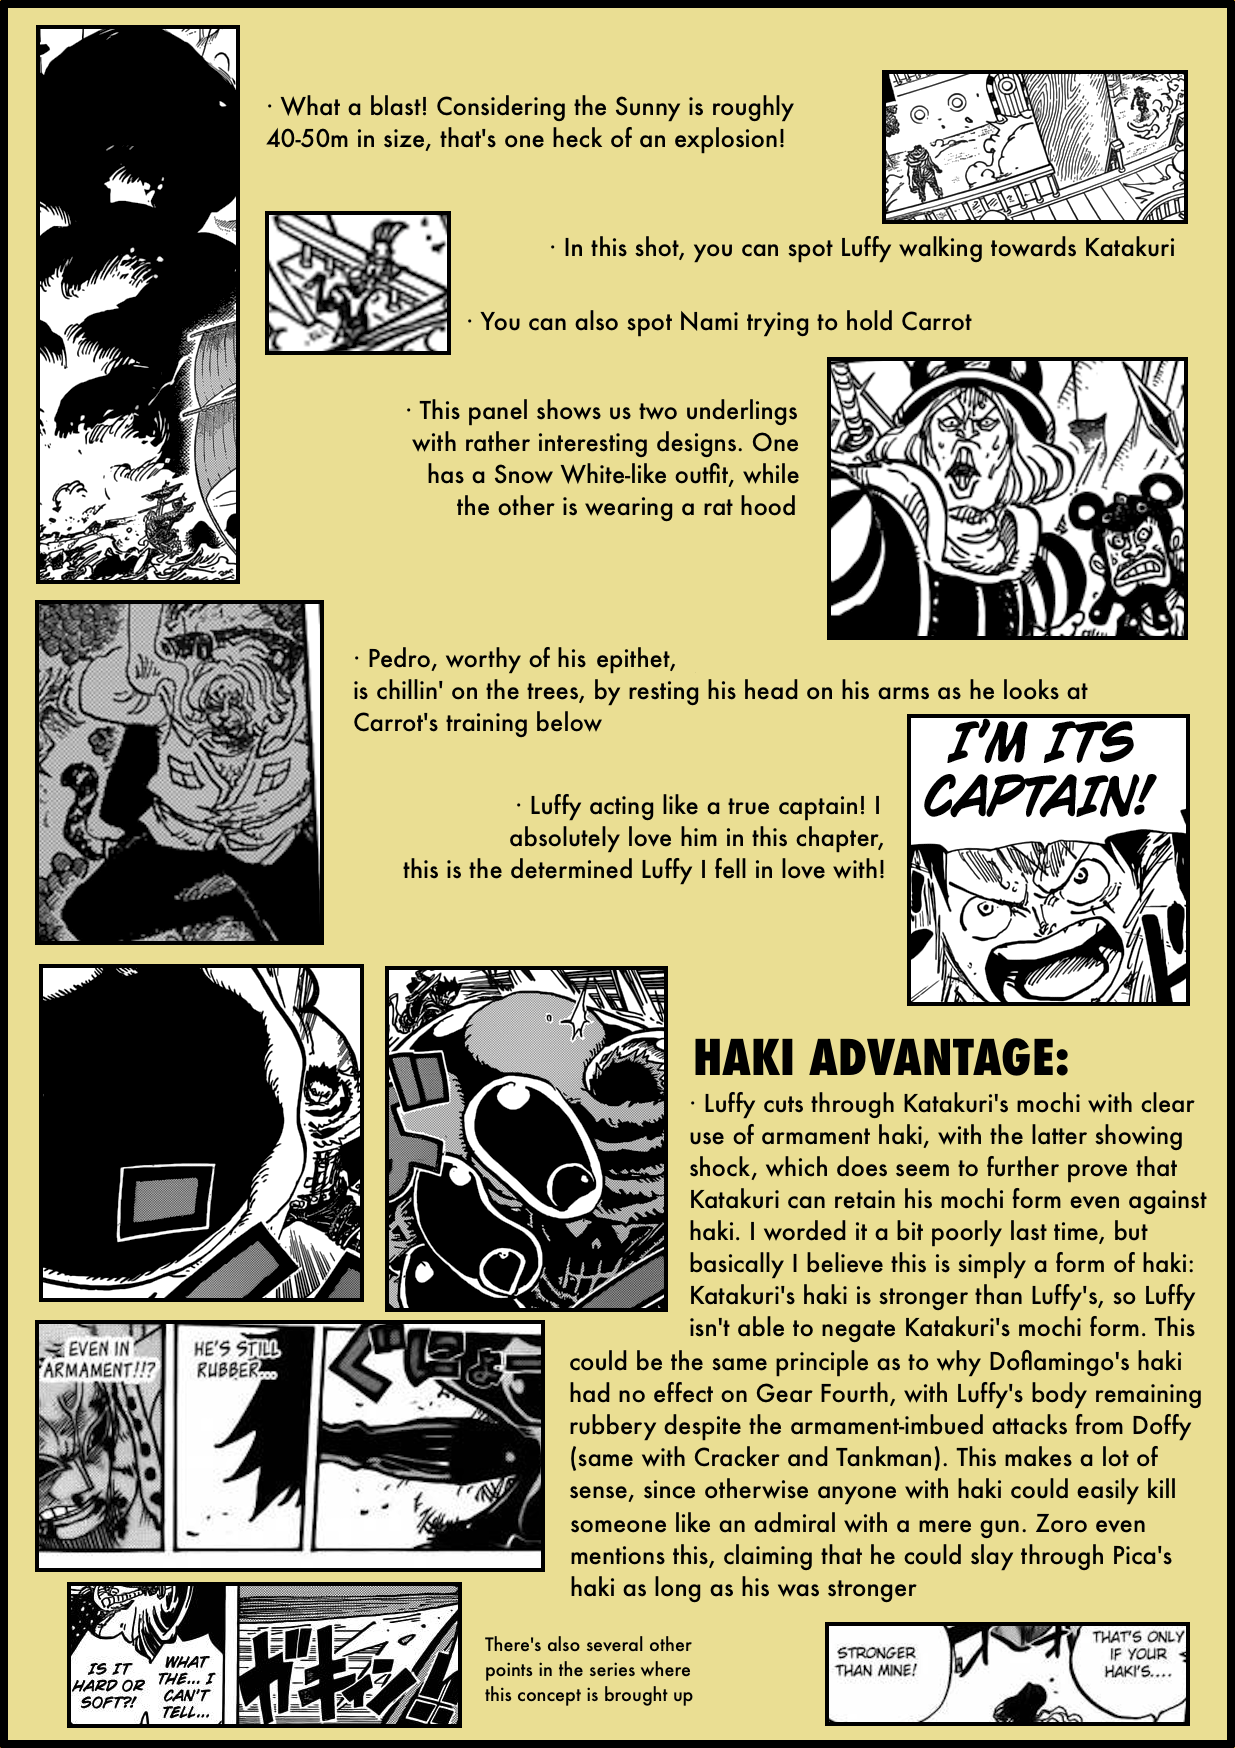 Chapter Secrets 78 Chapter 878 The Library Of Ohara